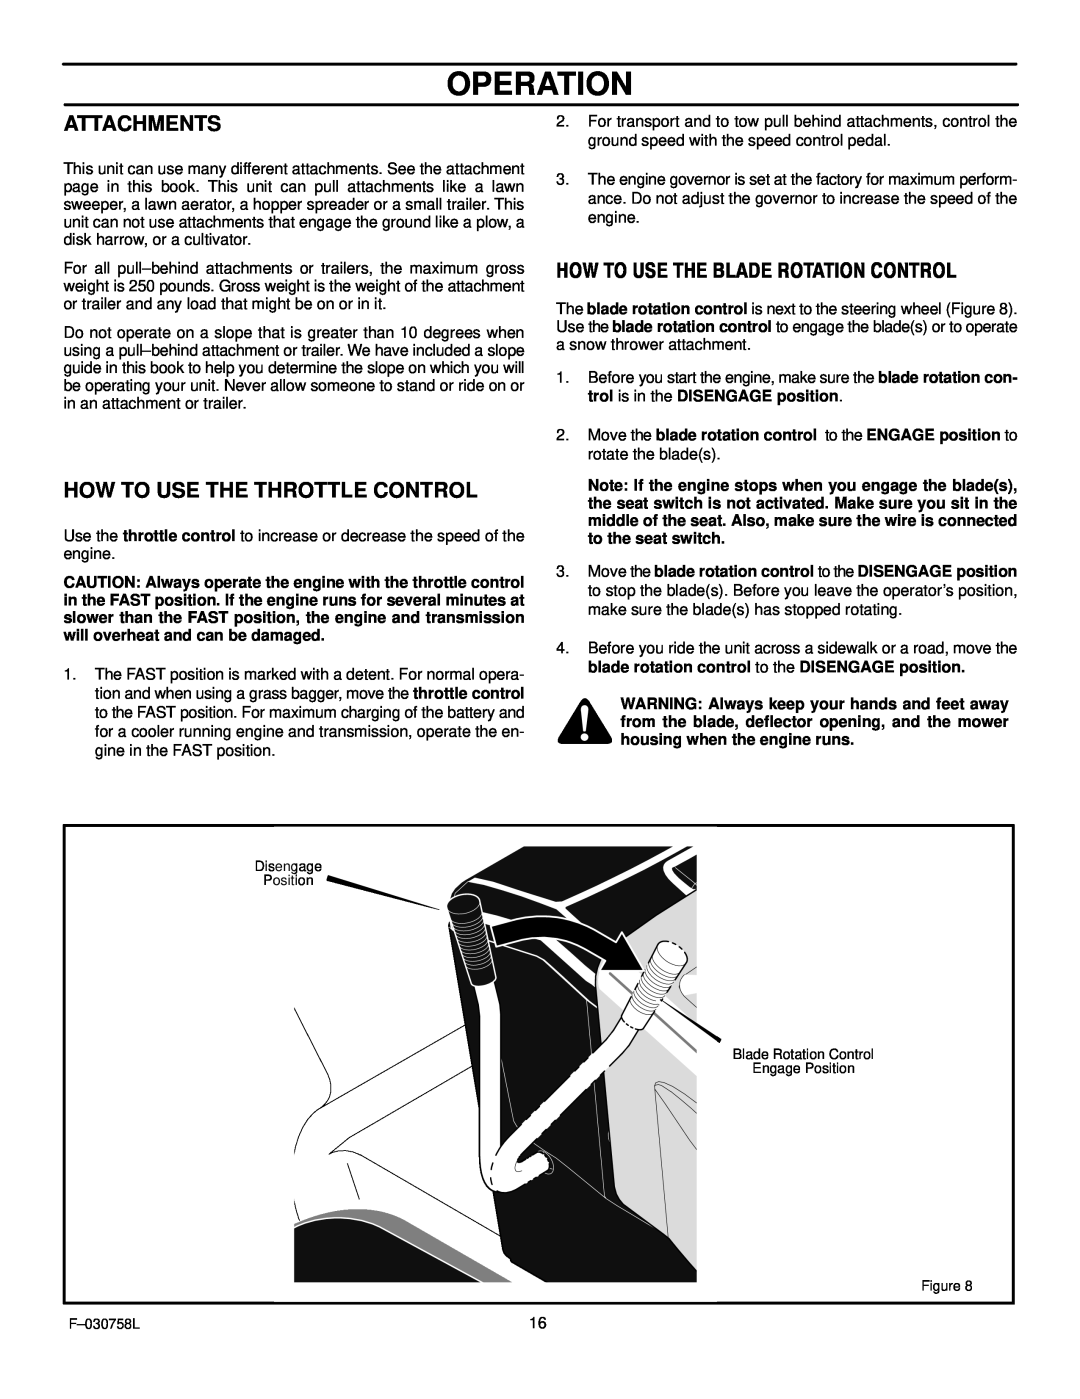 Murray 465609x24A manual Operation, Attachments, How To Use The Throttle Control, How To Use The Blade Rotation Control 